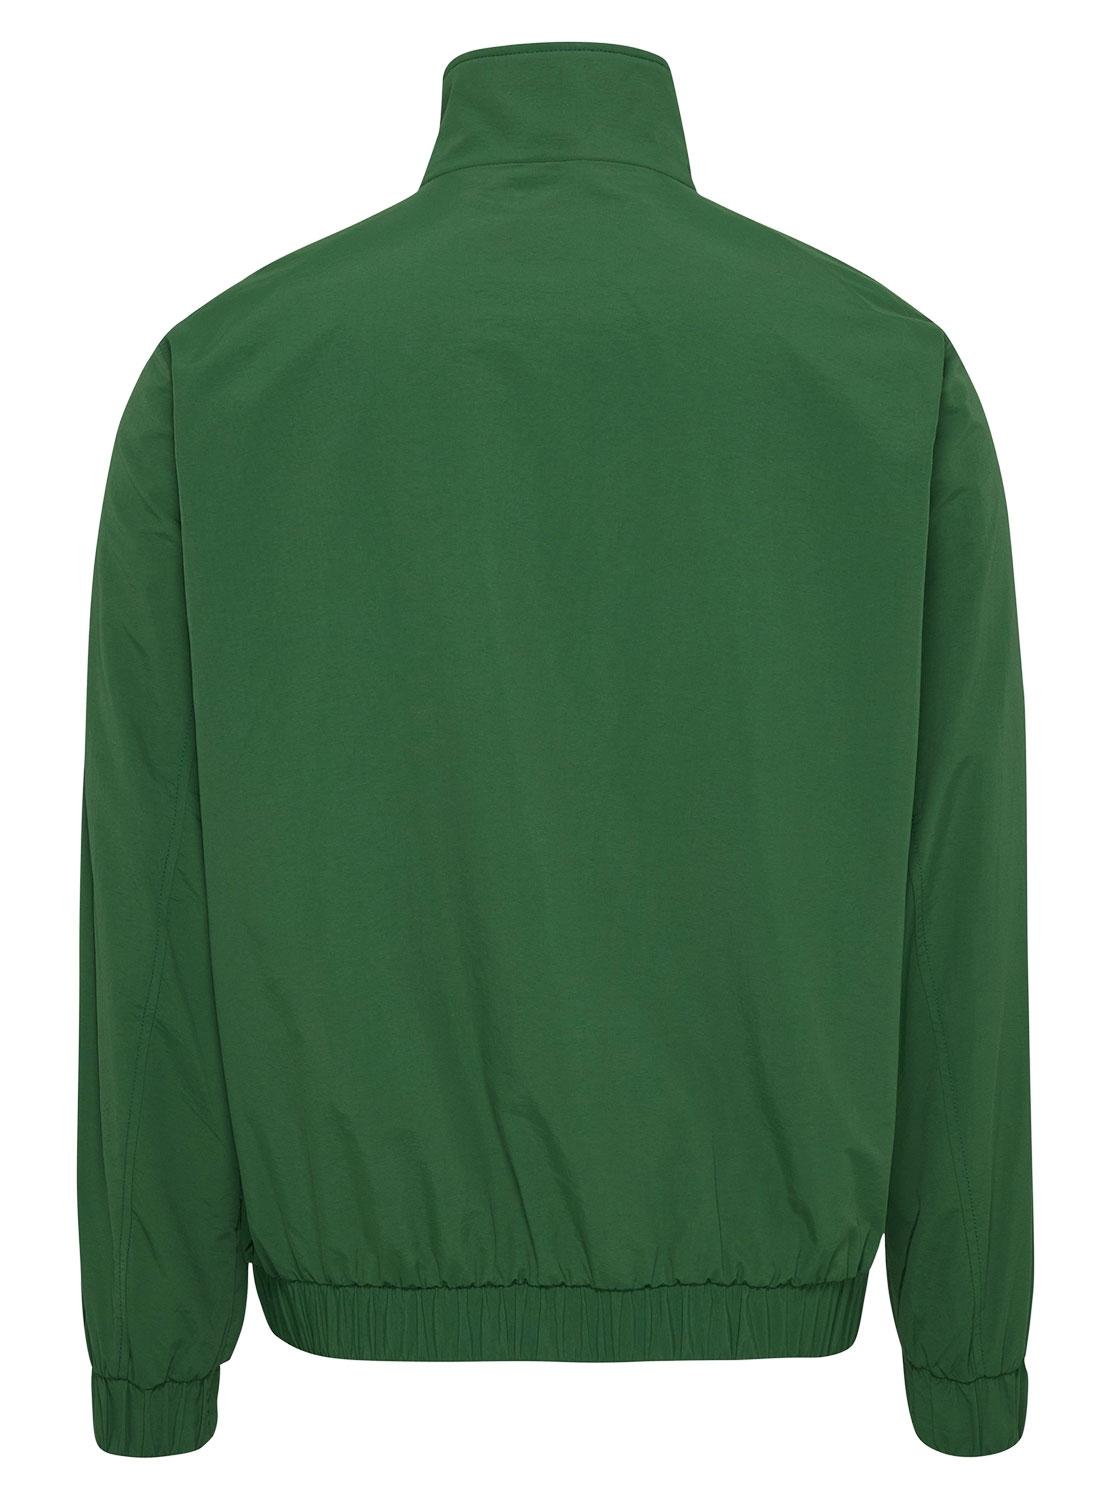 Giacca Tommy Jeans Essential Verde per Uomo